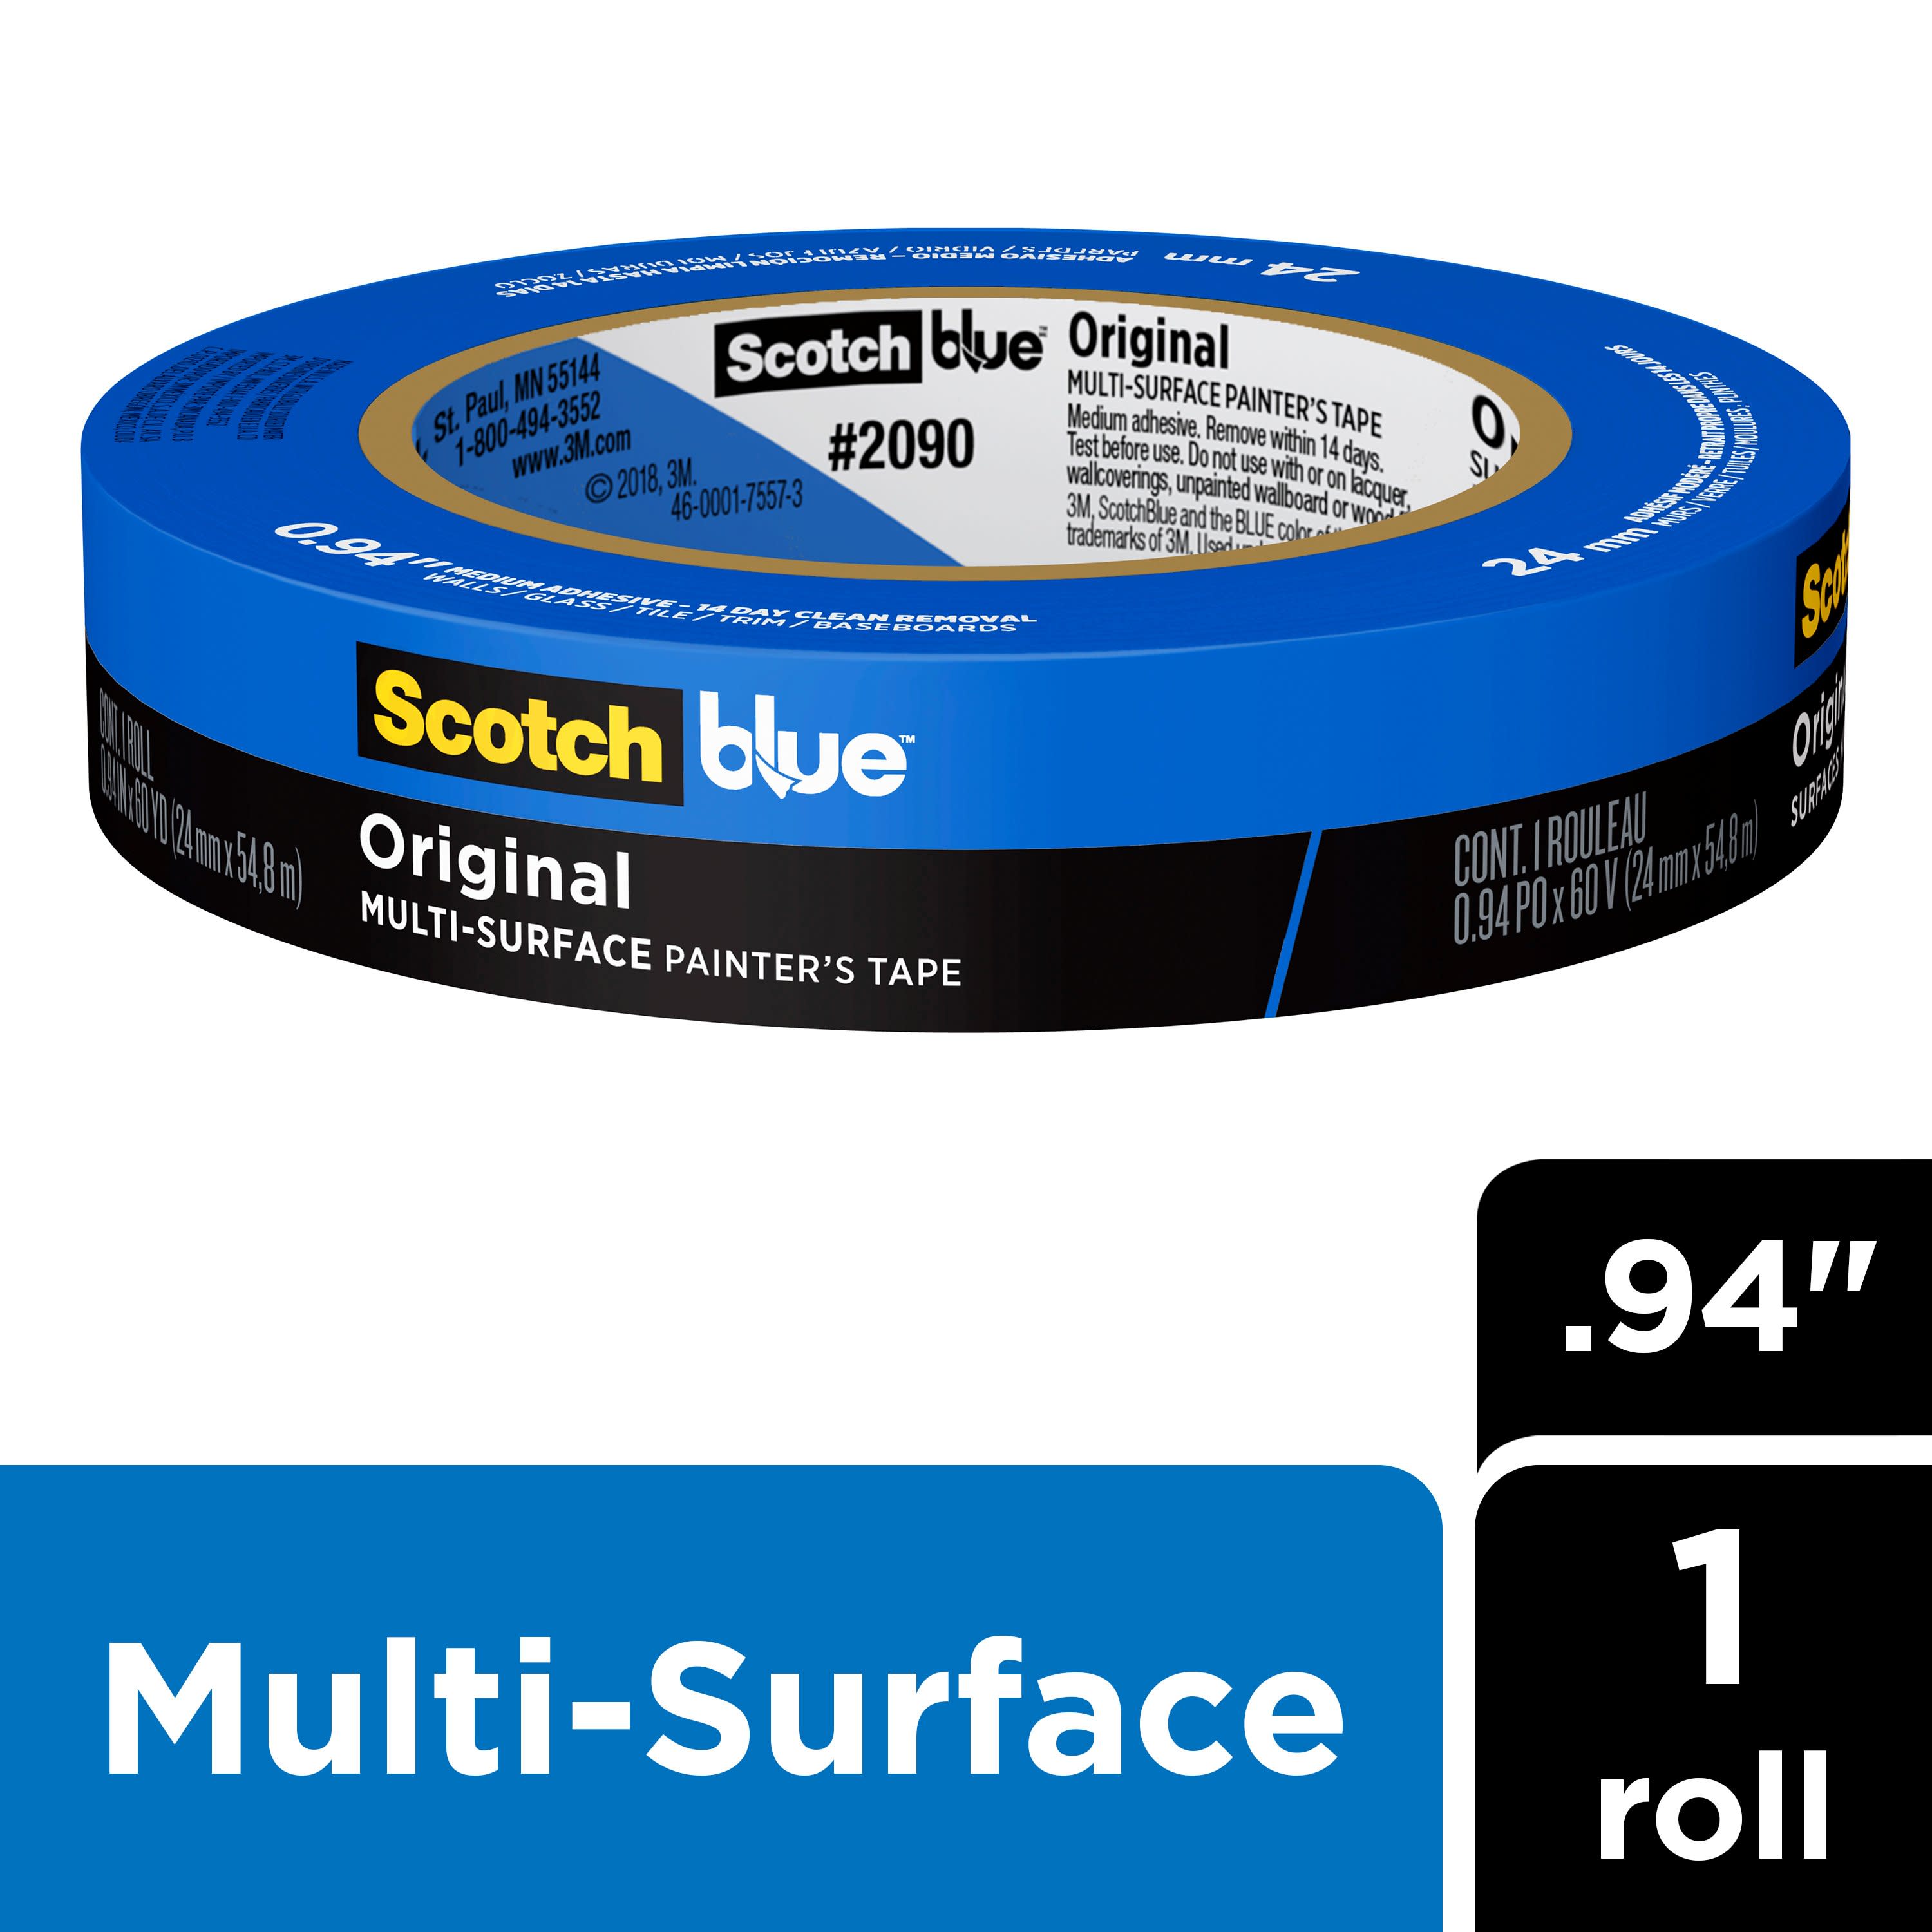 ScotchBlue Original Multi-Surface Painters Tape, Blue, 0.94 inches x 60 yards, 1 Roll - image 1 of 23